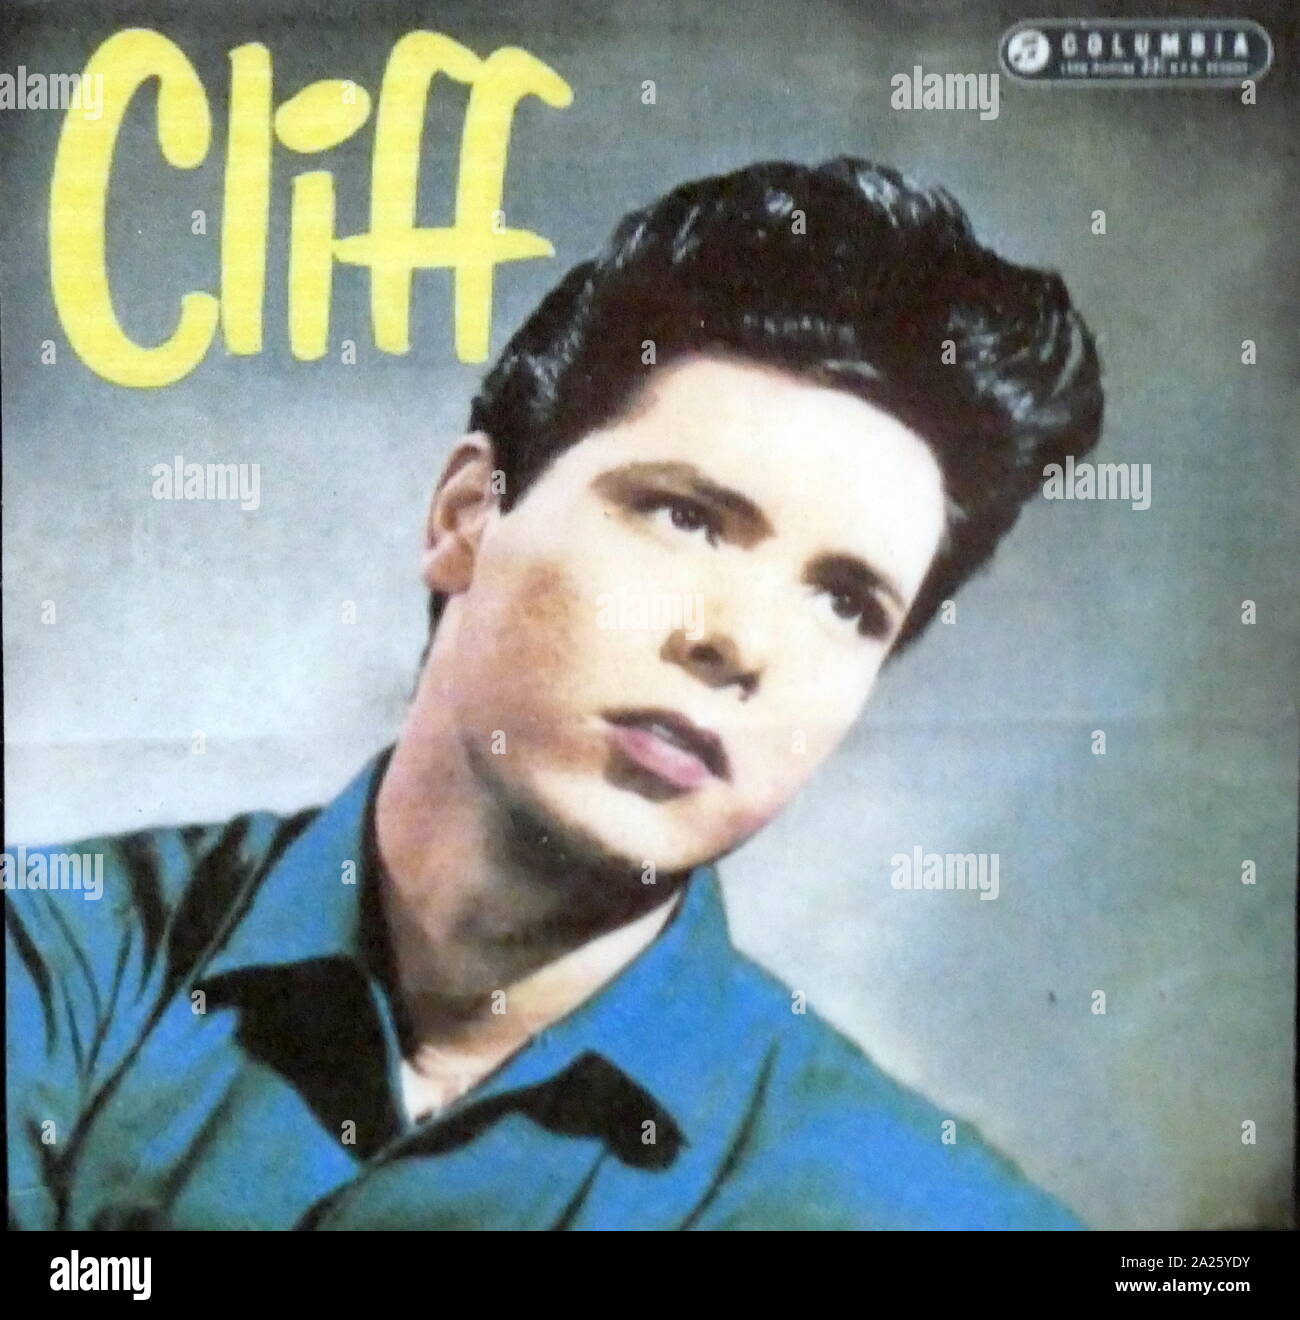 Cliff Richard 7 Poster British Pop Singer Musician Performer Picture Famous Star